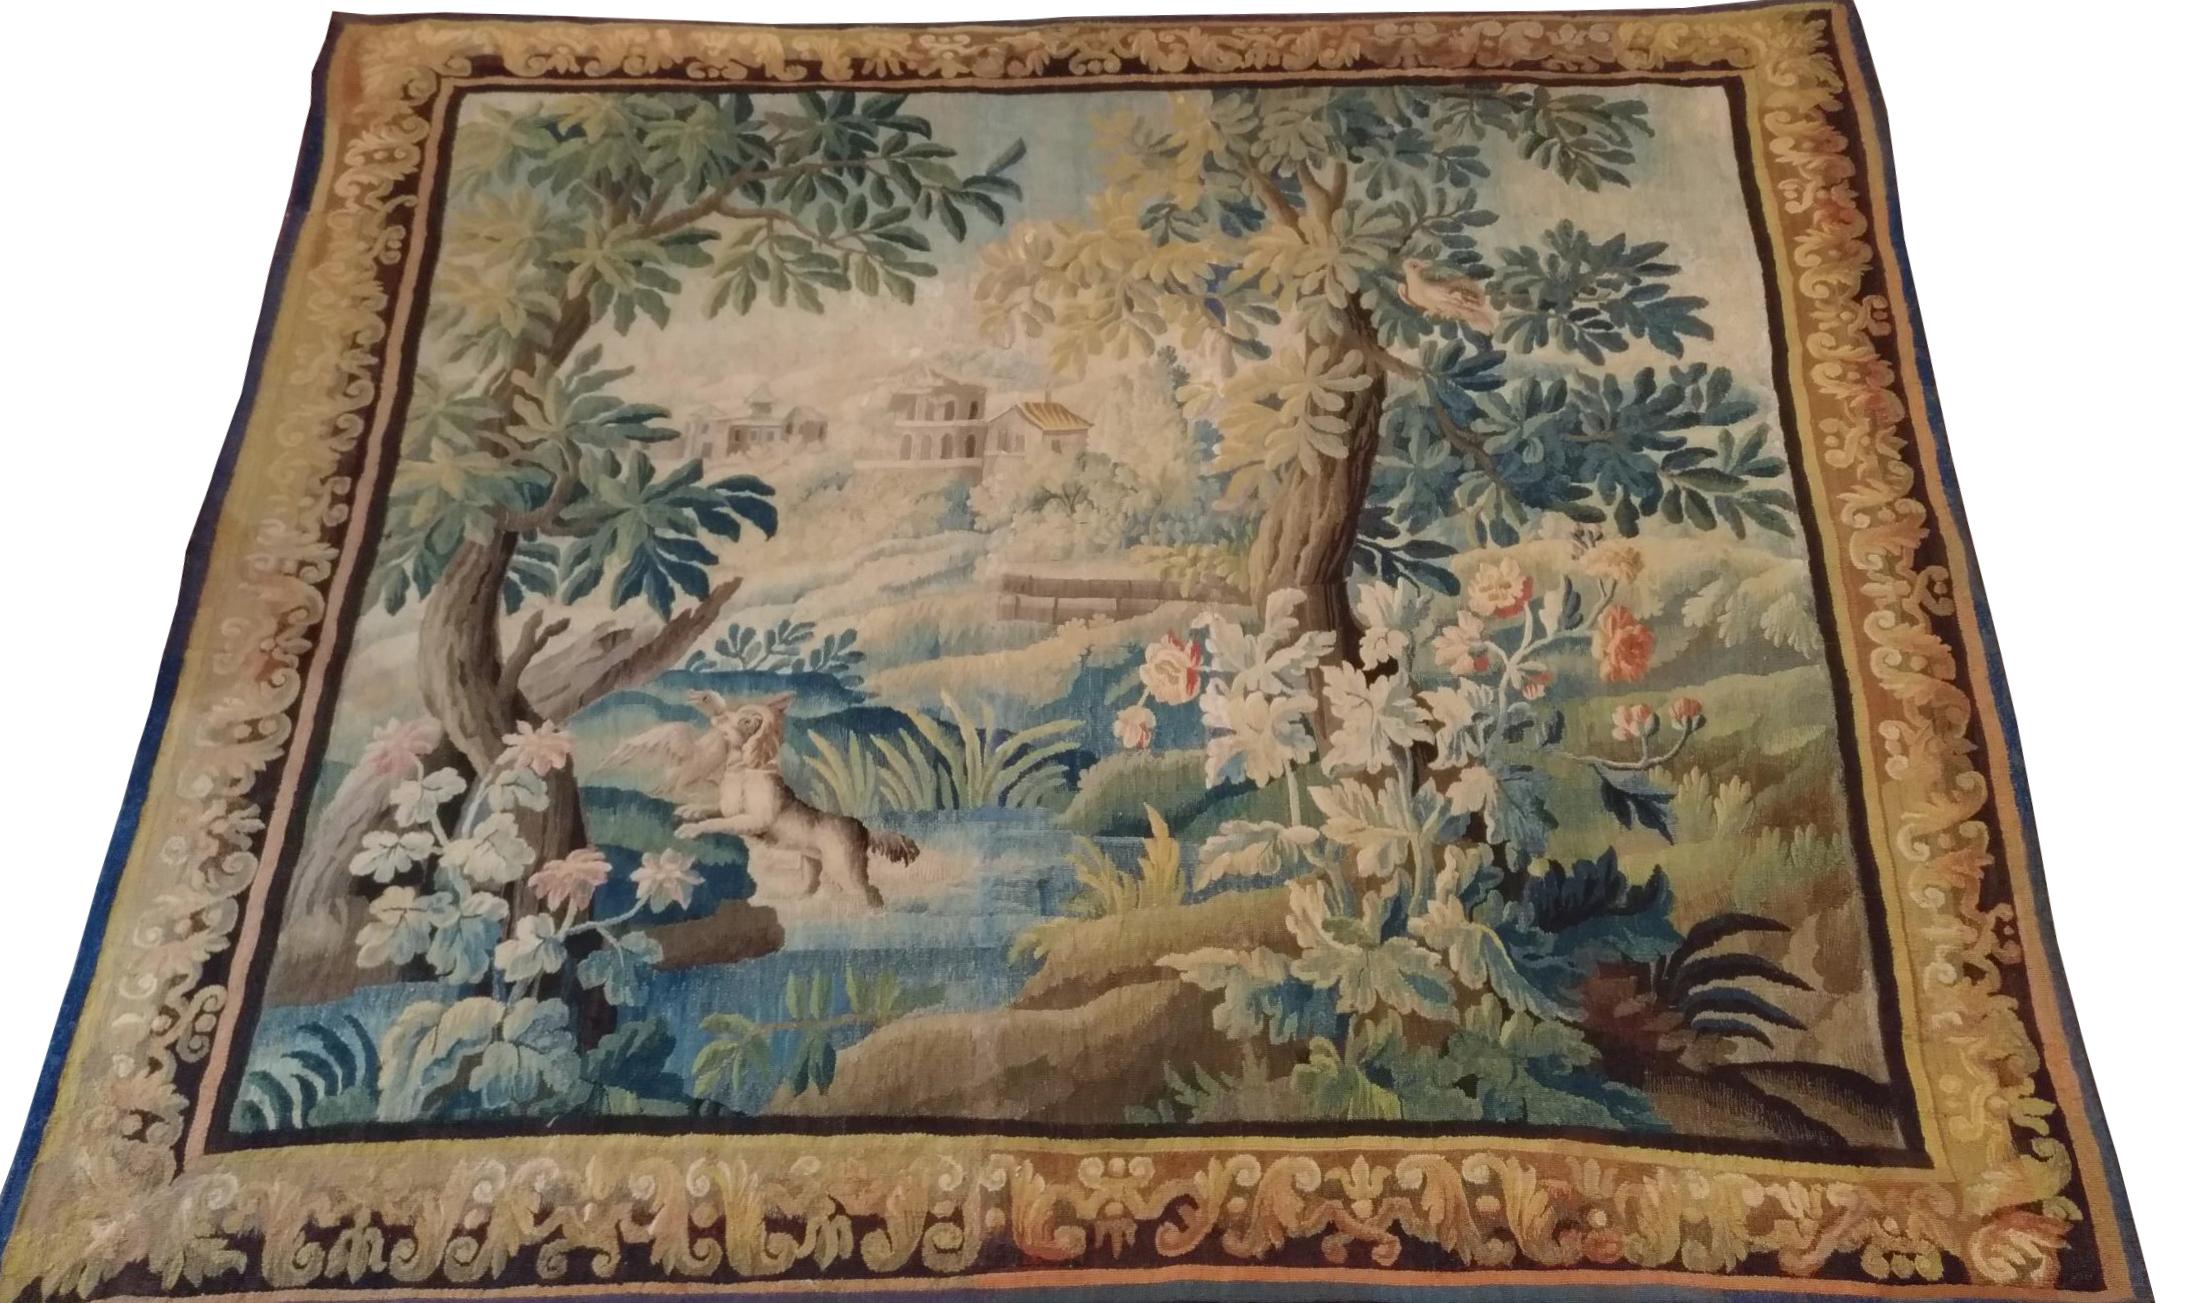 1026 - Wonderful Large 18th Century Fine French Aubusson Tapestry 10